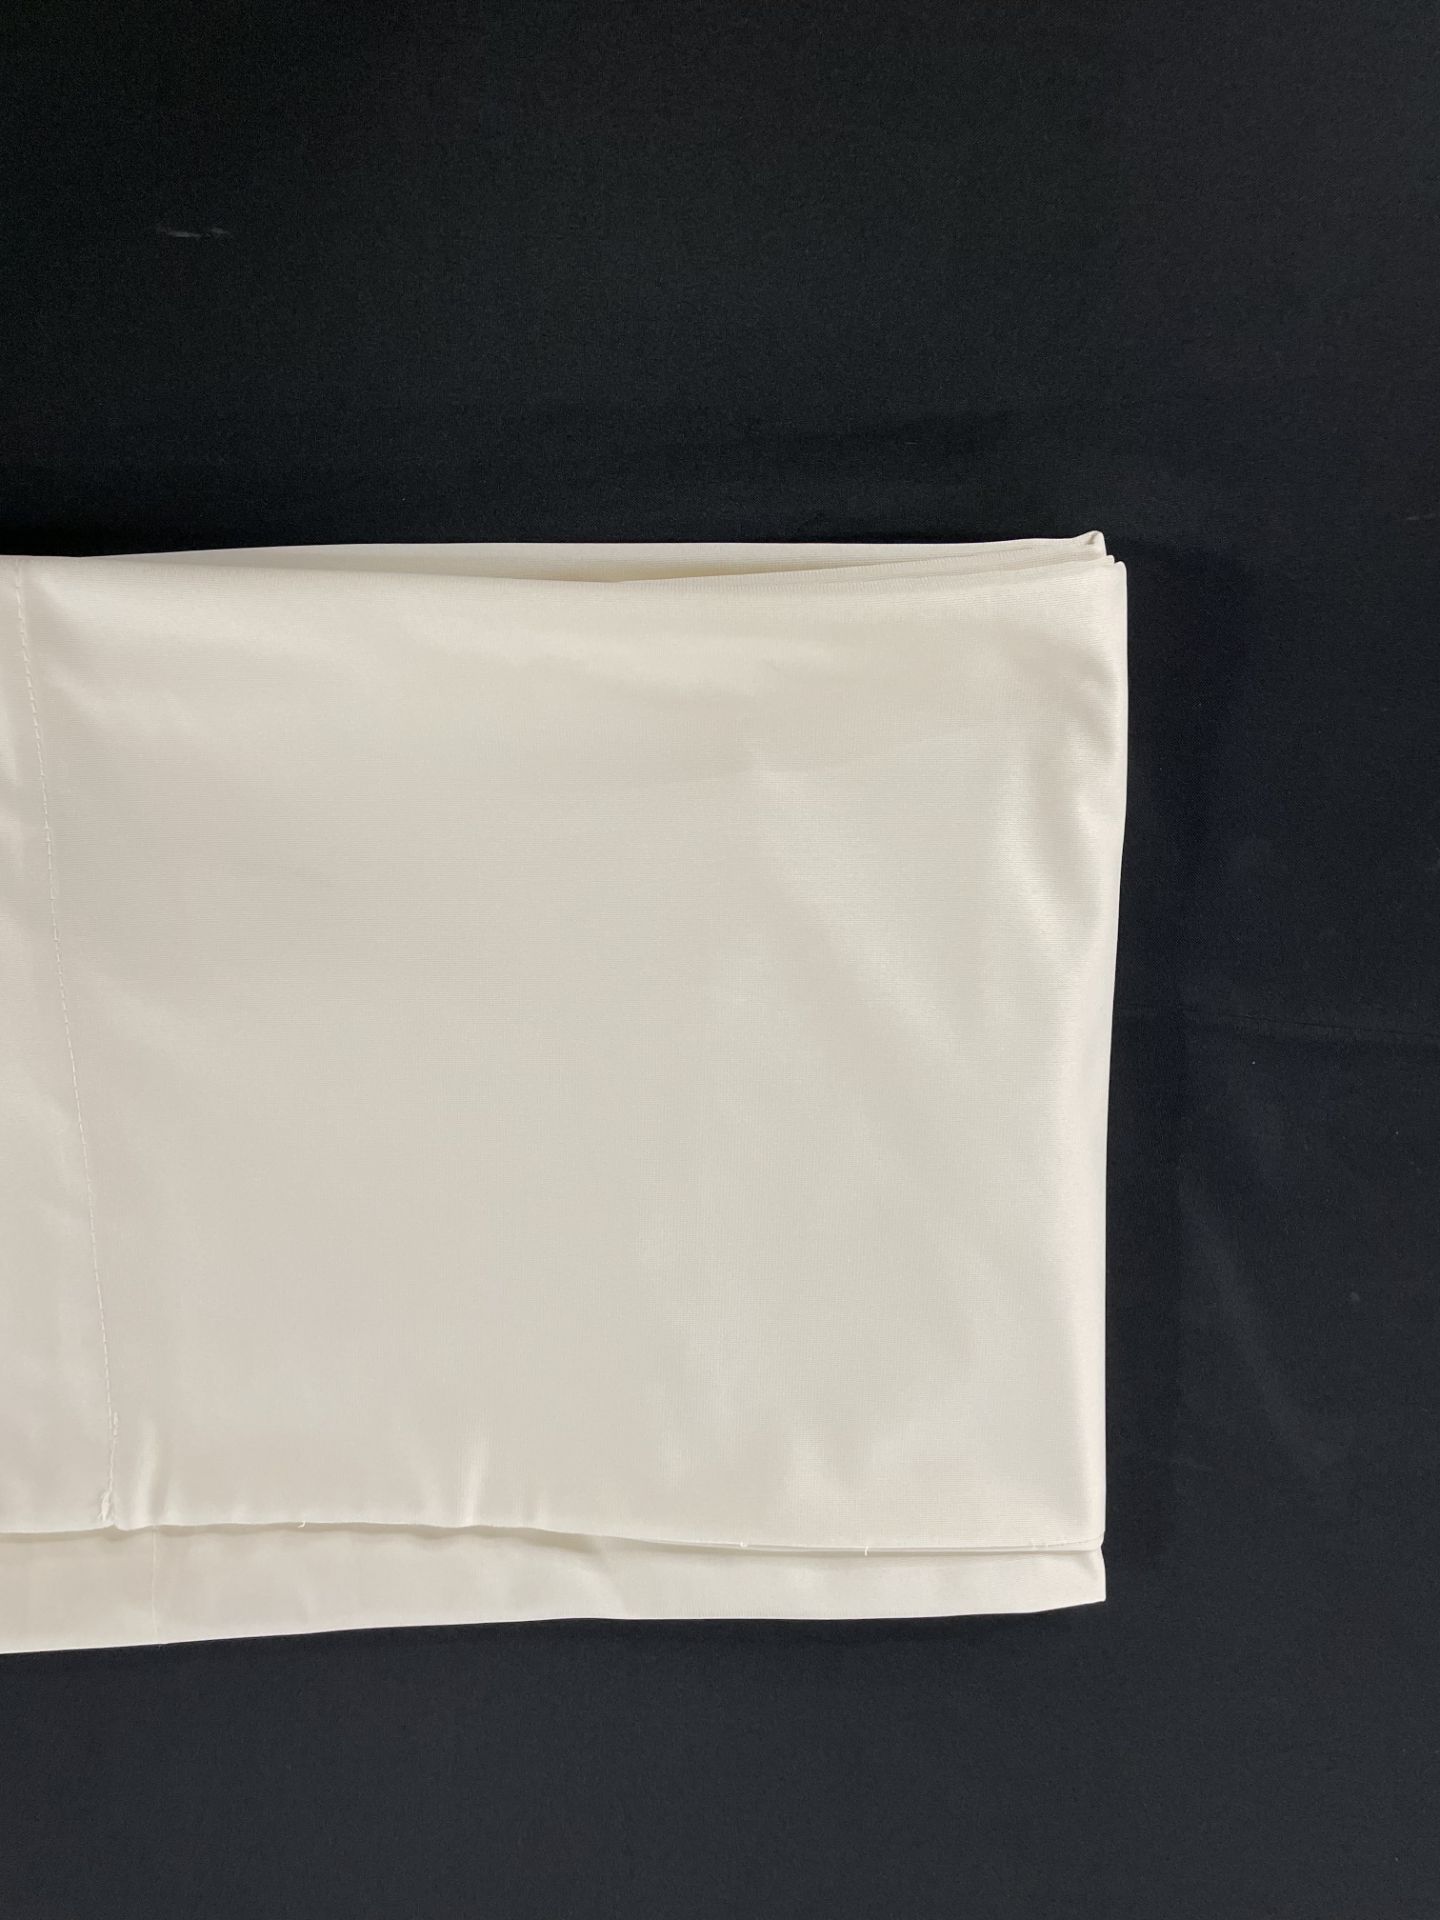 TABLECLOTH WHITE 72"X72" POLY